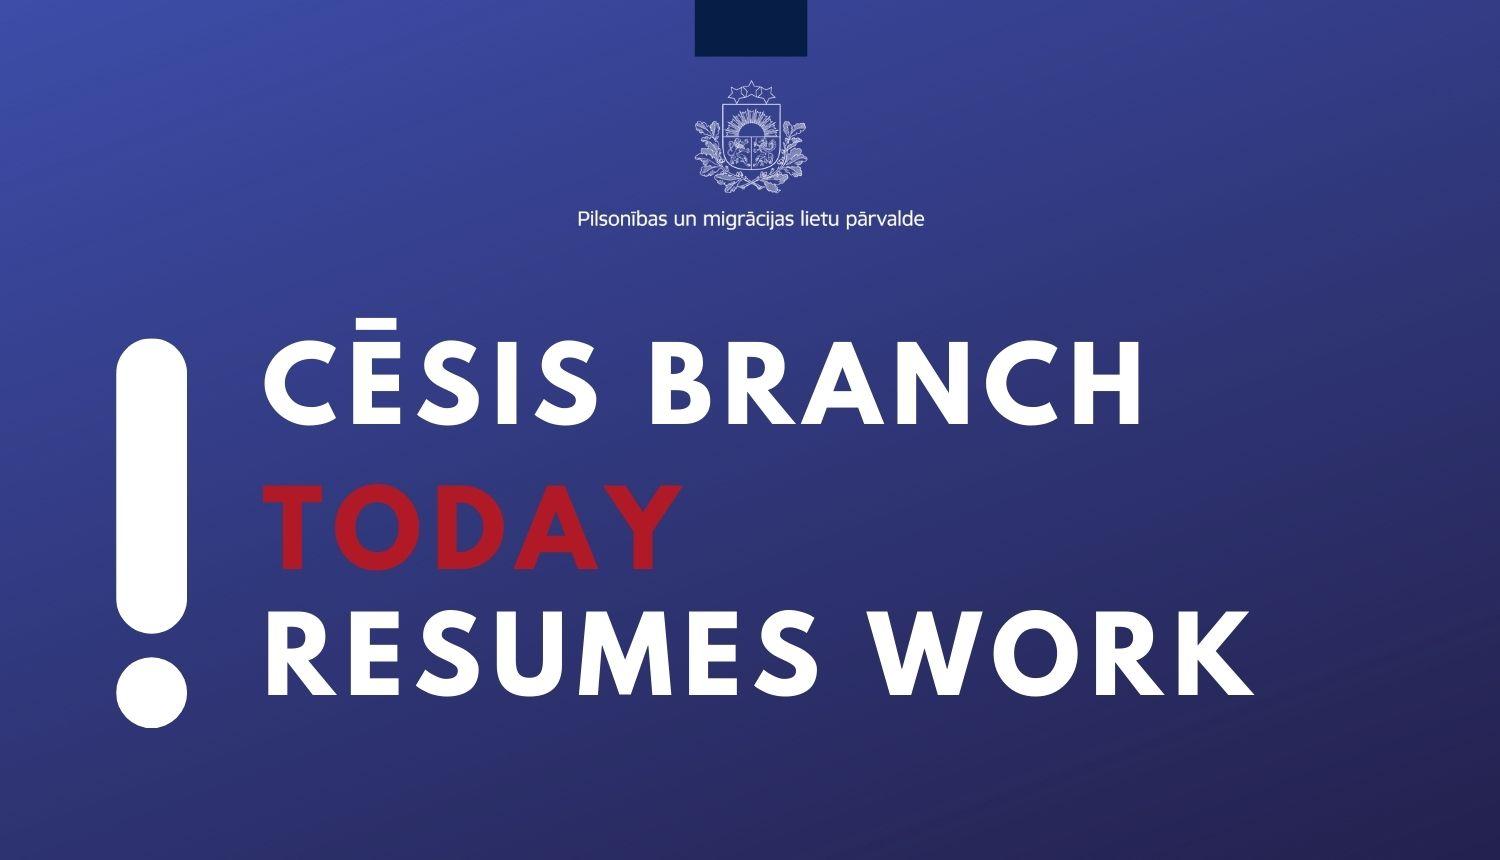 Text on blue background - Cesis branch today resumes work 